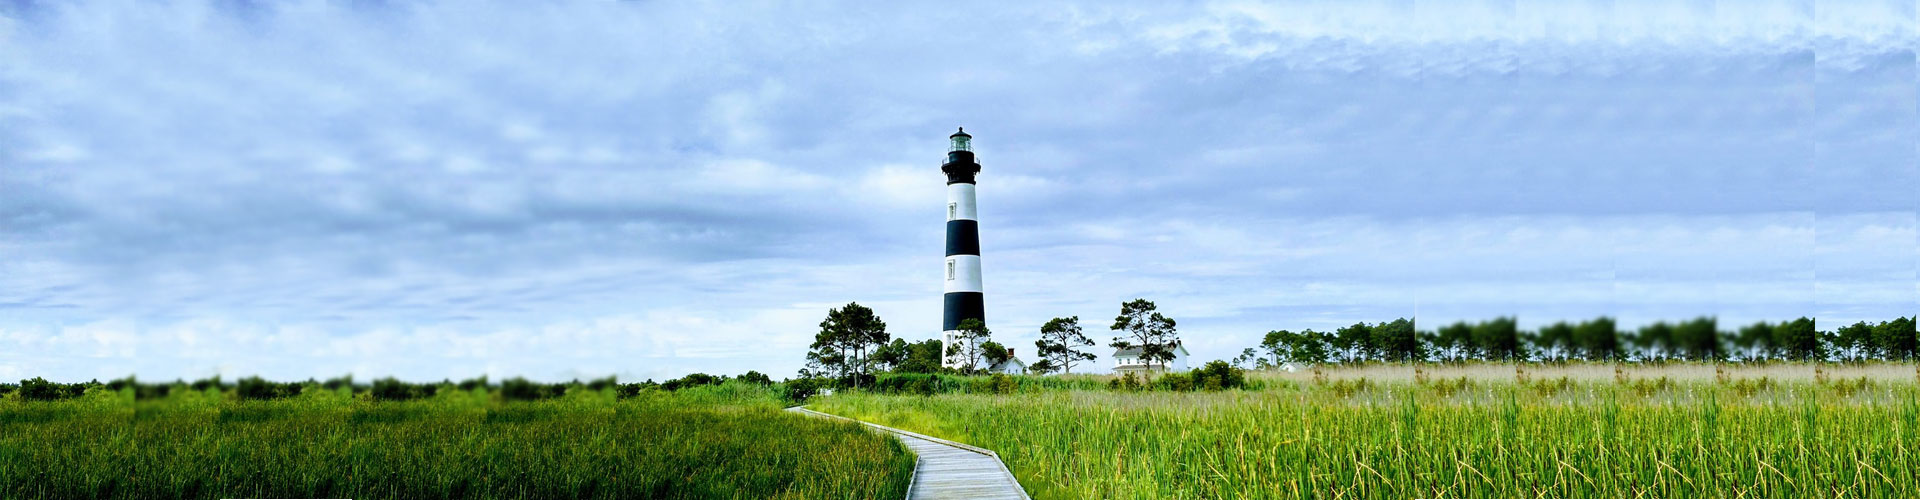 10 Tips To Make Your Vacation on the Outer Banks Memorable